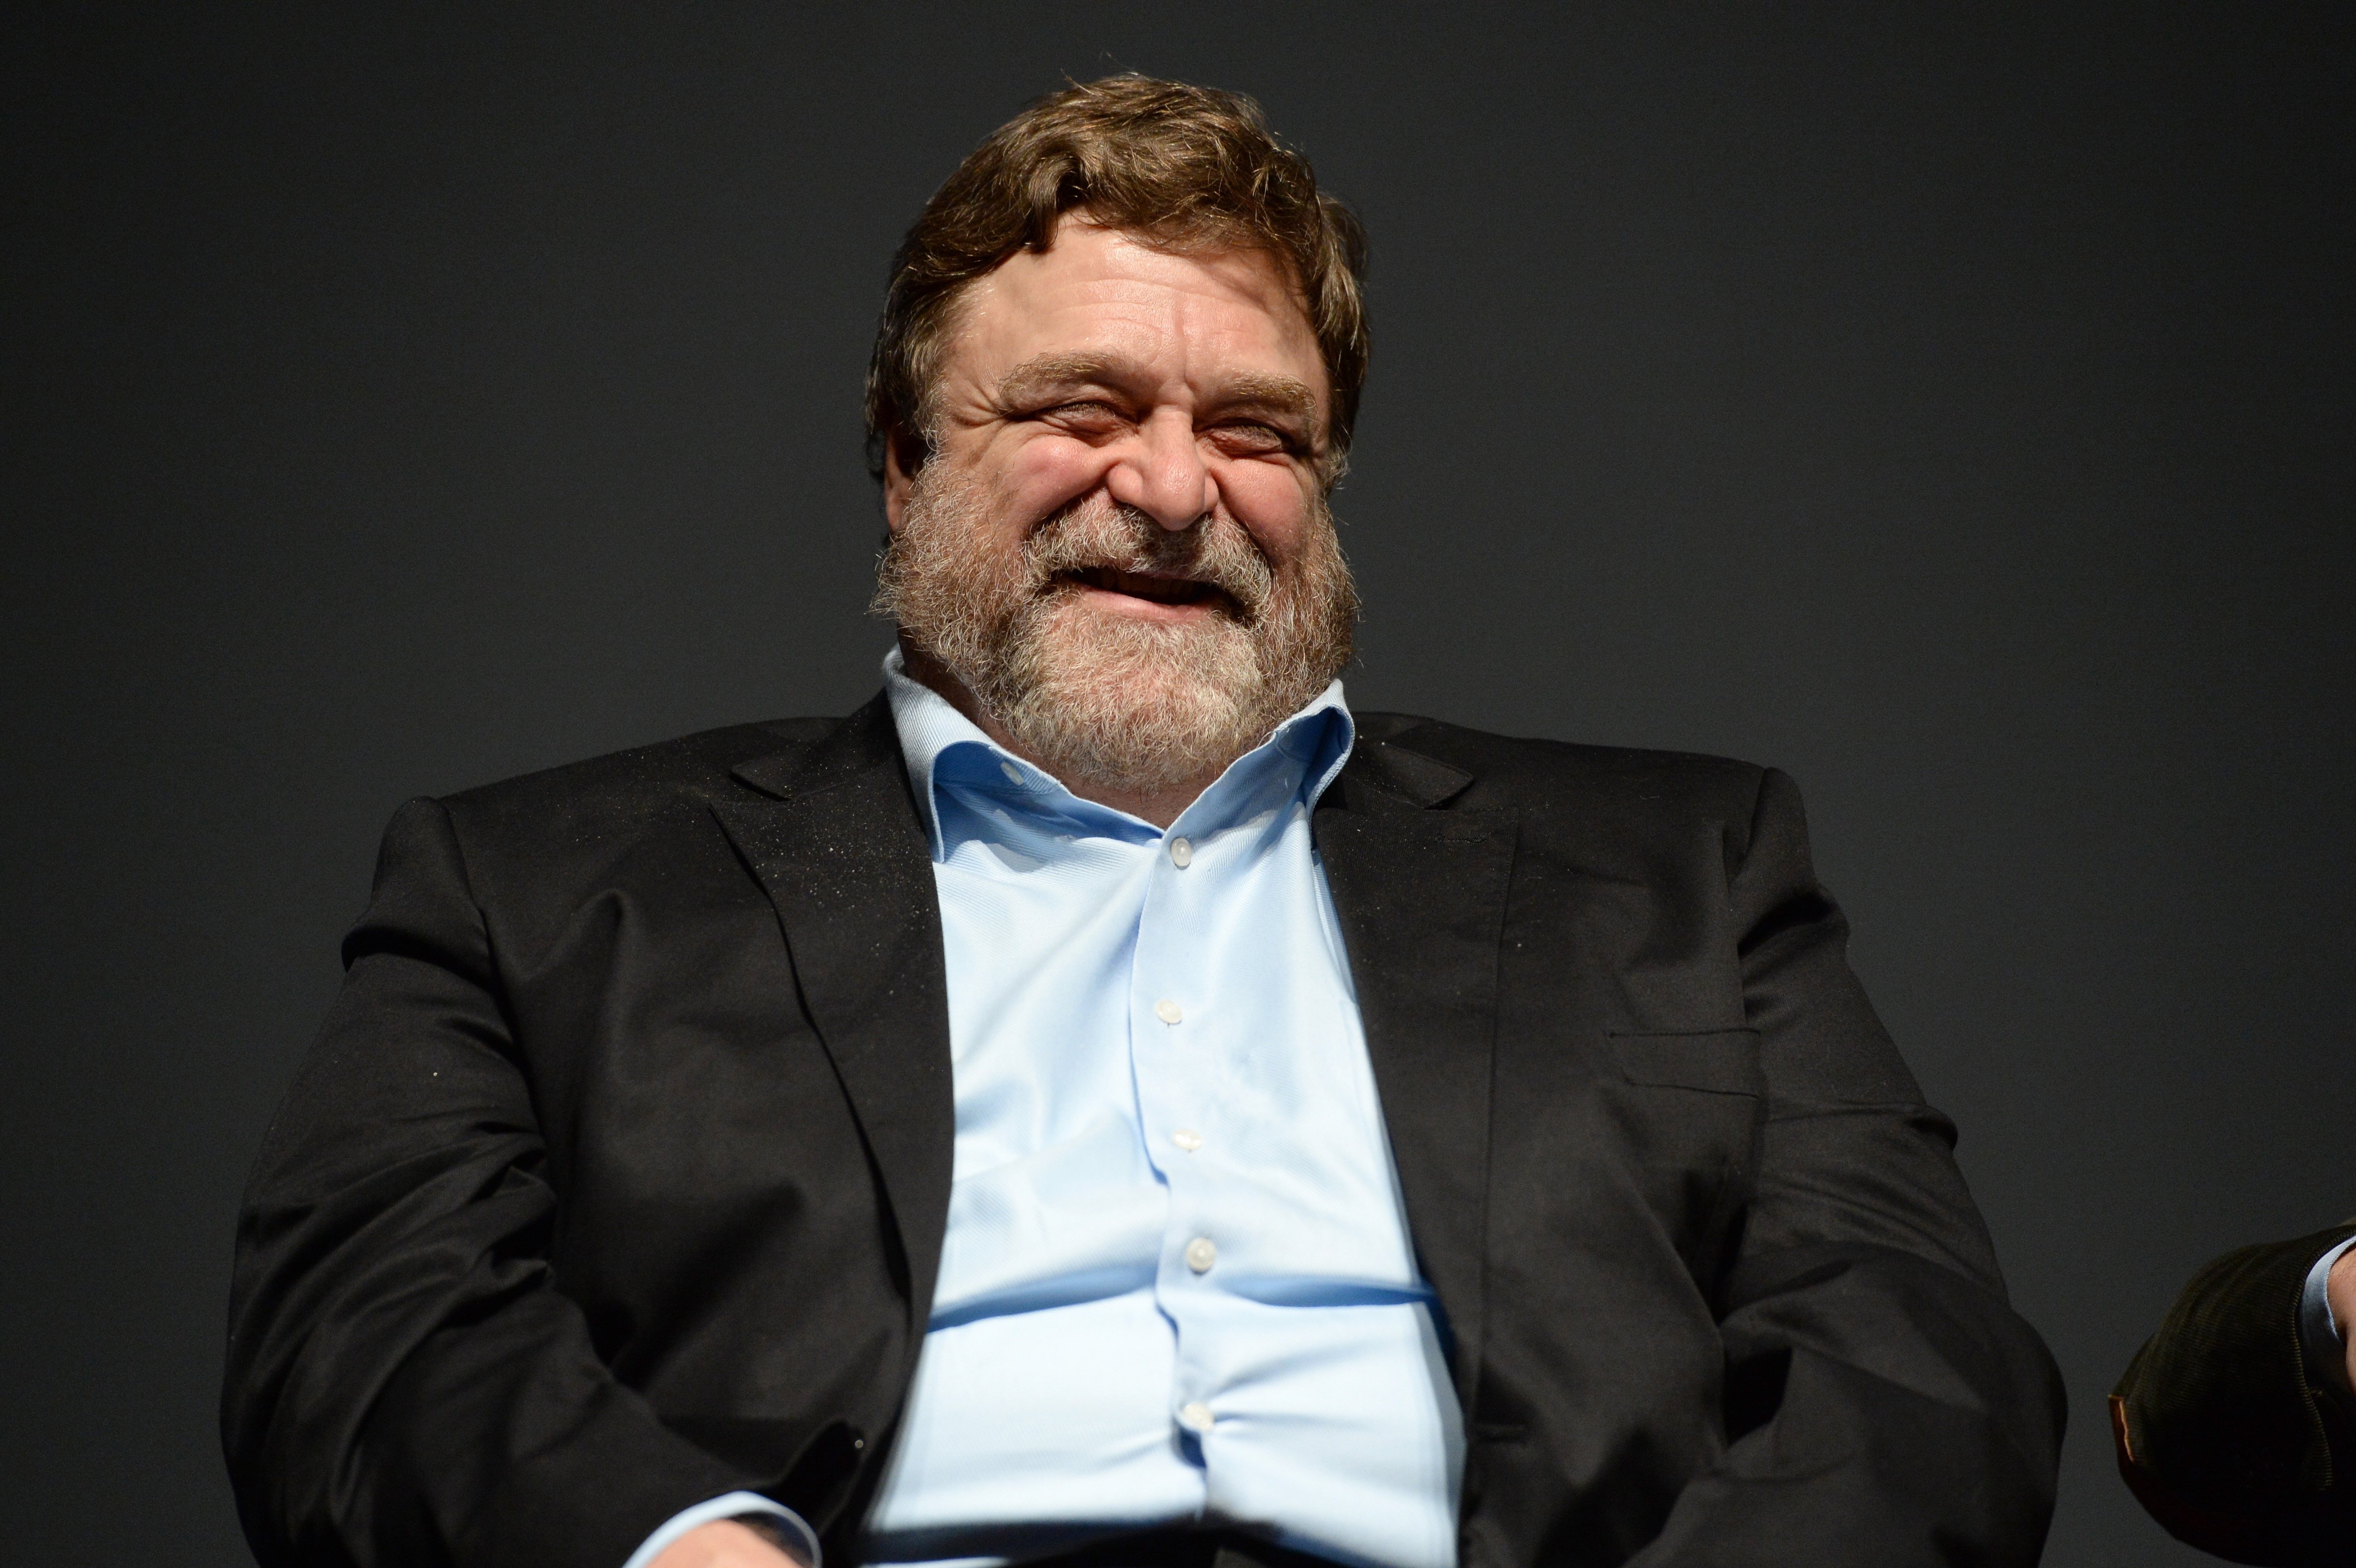  John Goodman speaks onstage at the screening of "The Gambler" during the AFI FEST 2014 on November 10, 2014 | Photo: GettyImages